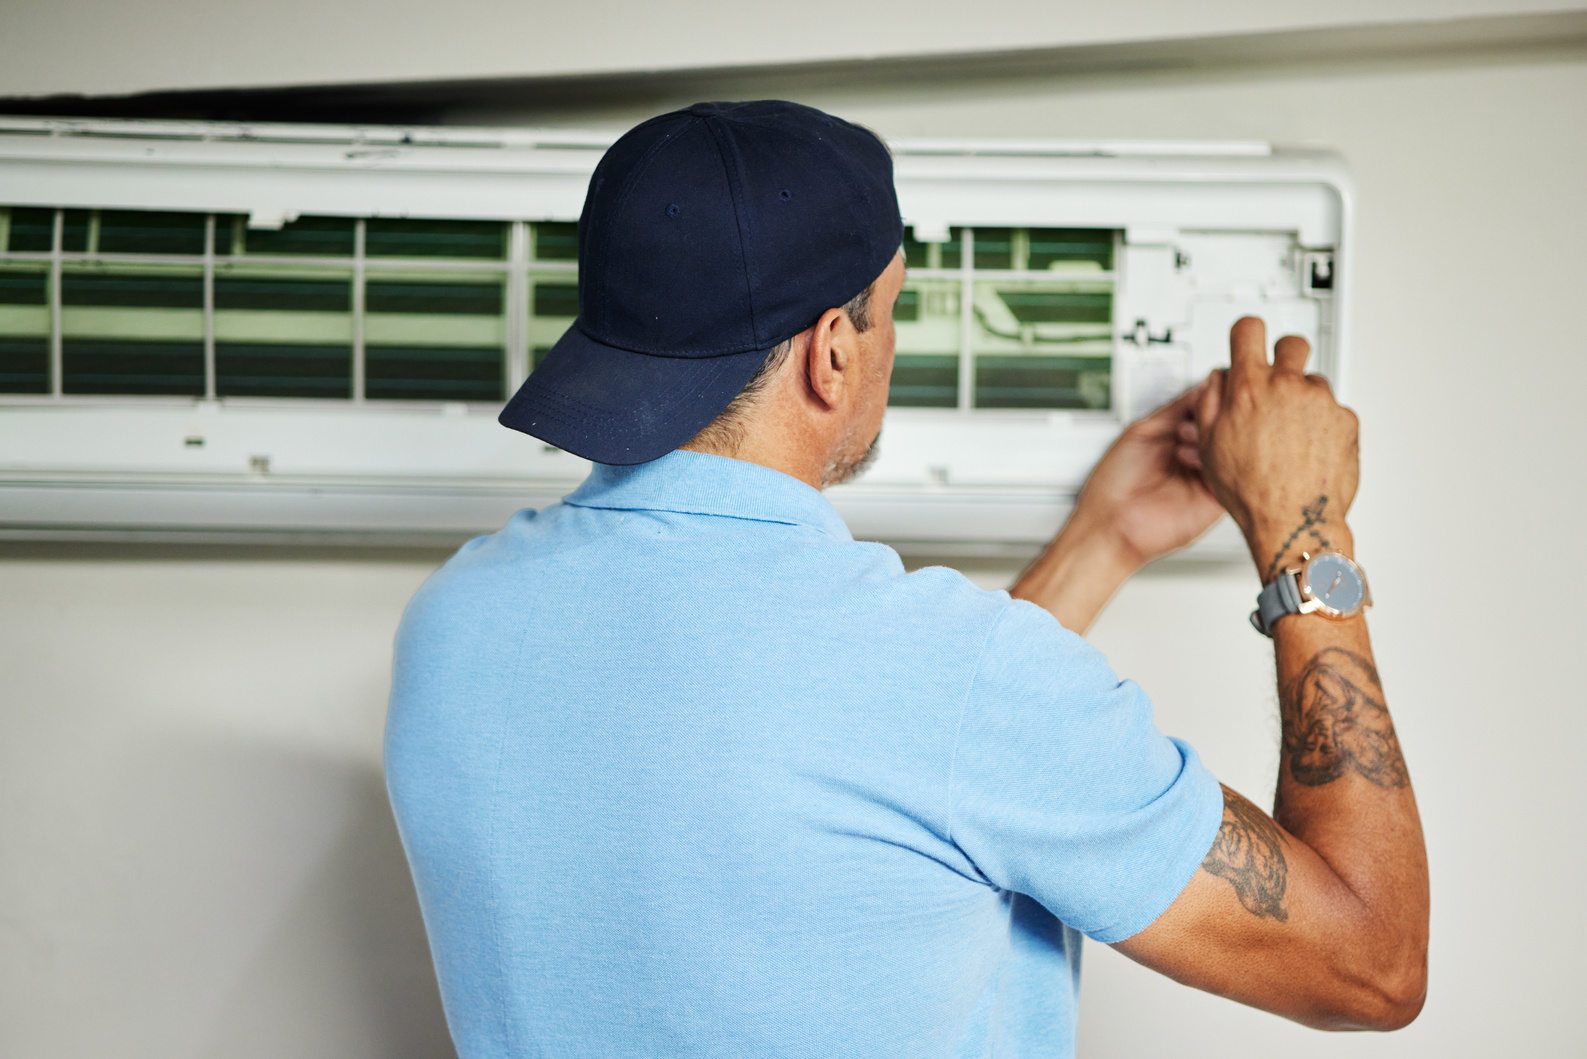 Man, Electrician and Ac Repair for Air Conditioner Maintenance from the Back. Mechanic, Technician and Engineering Tools to Fix Power of Aircon Machine, Hvac Services and Check Electrical Ventilation